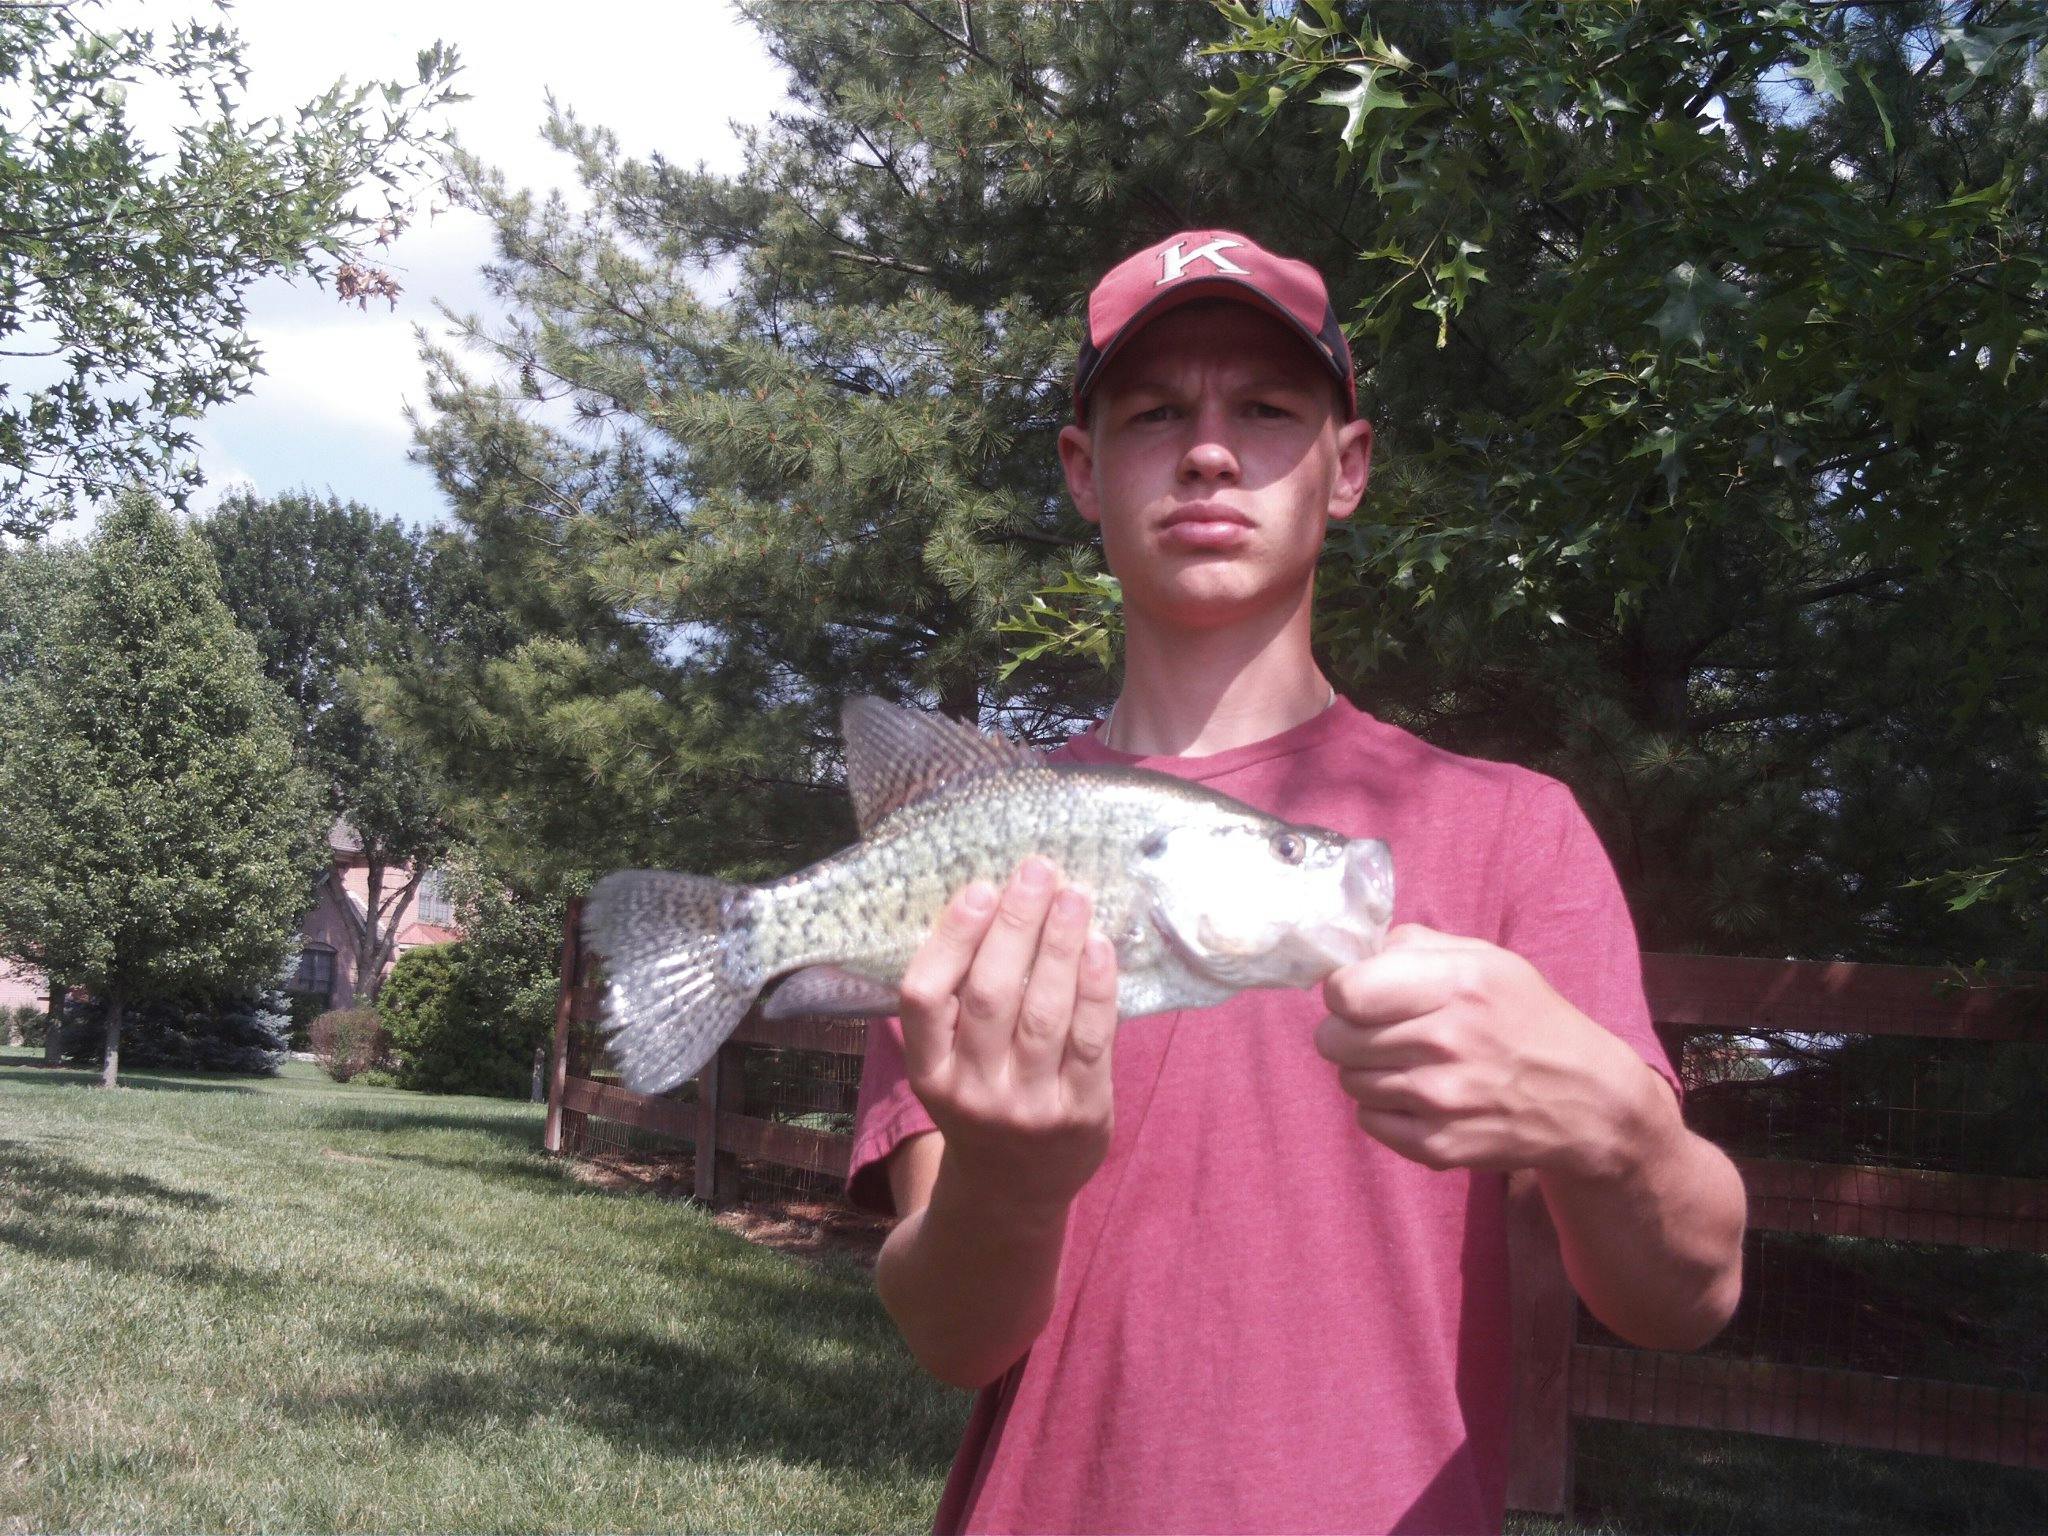 The author as a young man holds up a crappie.